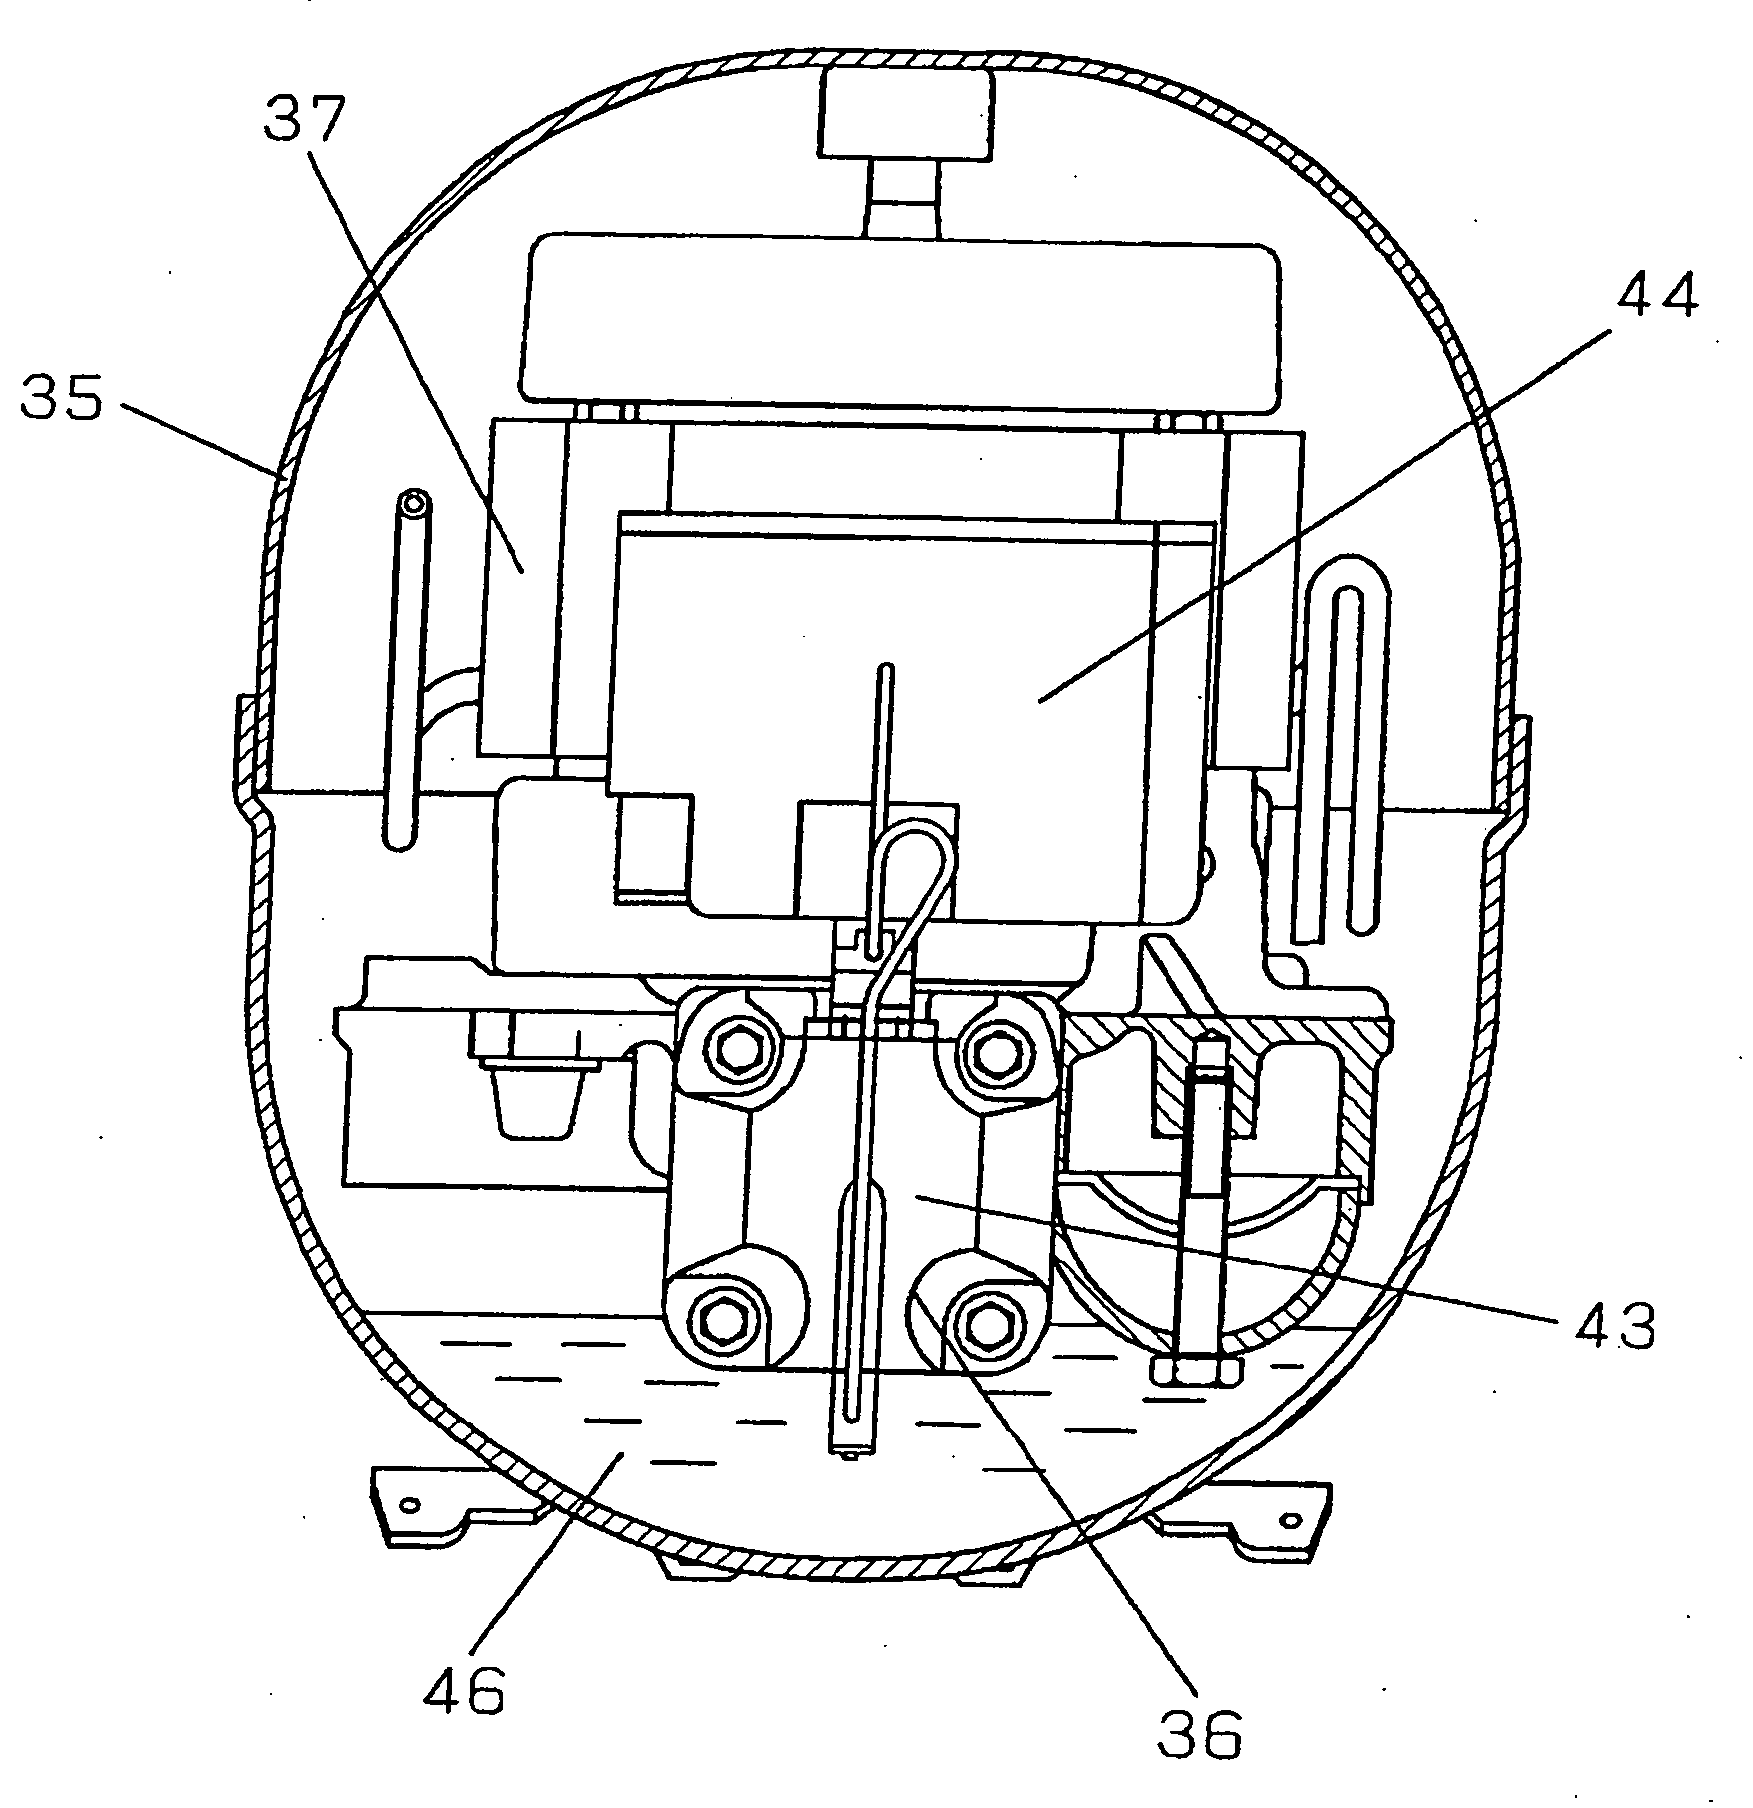 Hermetic compressor and freezing air-conditioning system